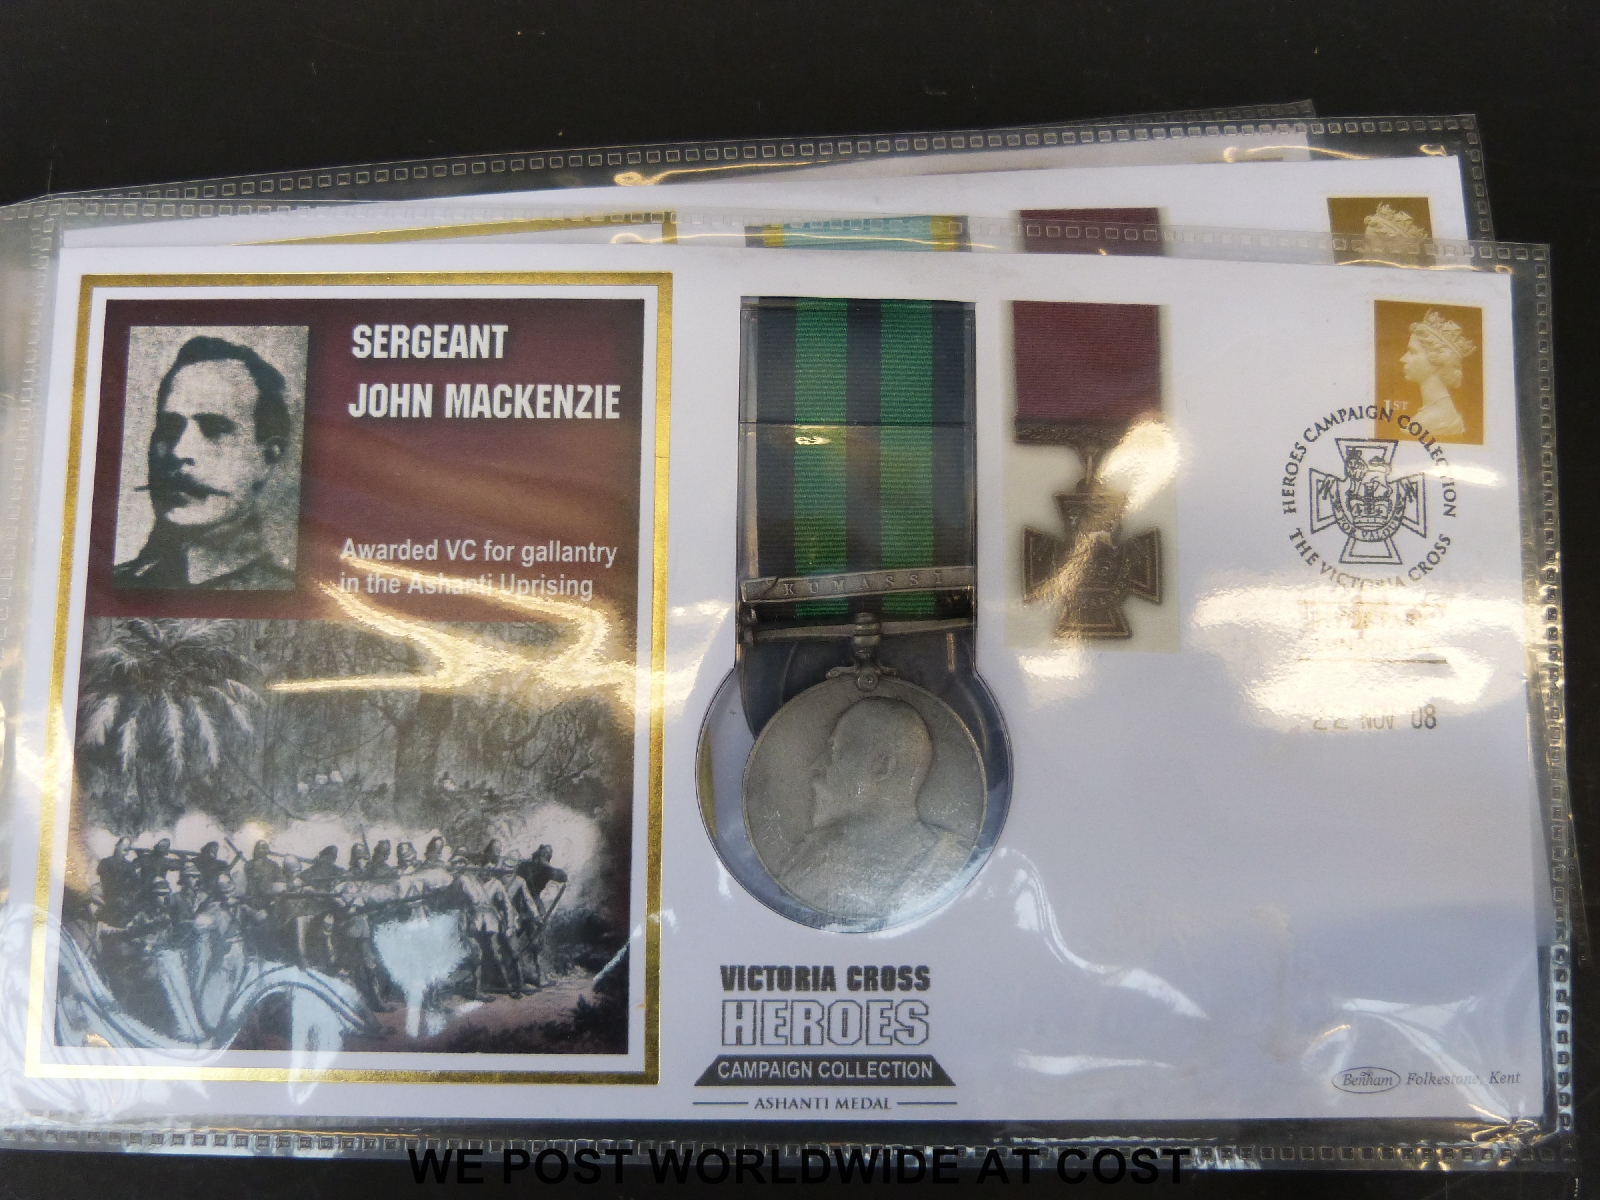 An album of stamp covers relating to the Victoria Cross Heroes Campaign Collection